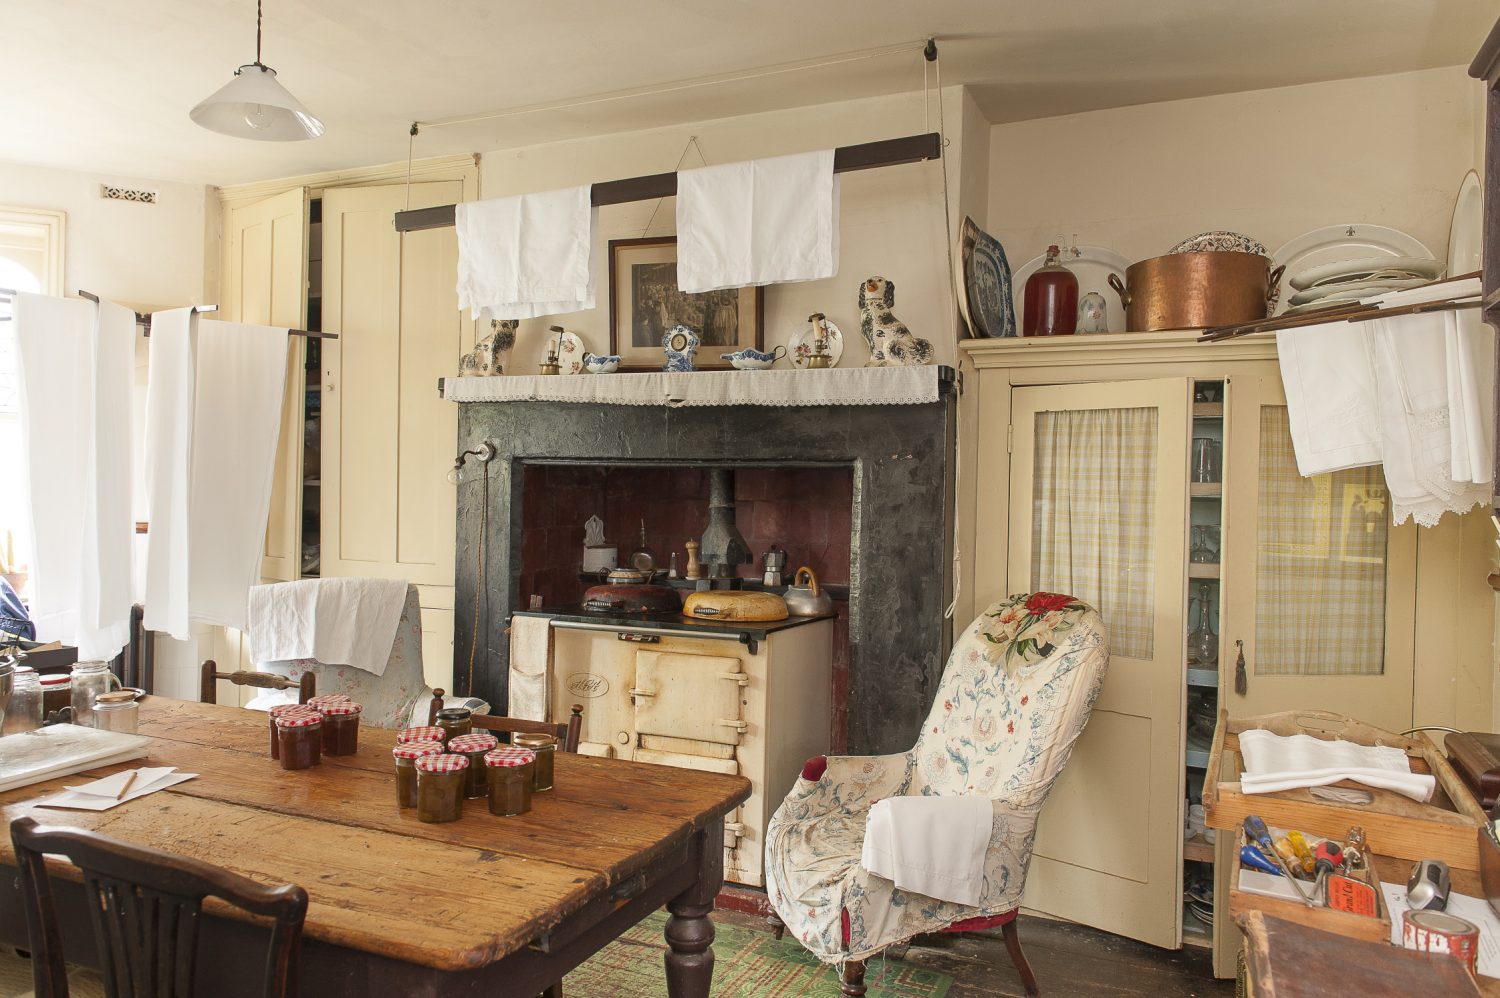 In the large kitchen, ironed cotton sheets hang on wooden hoist and spindle airers